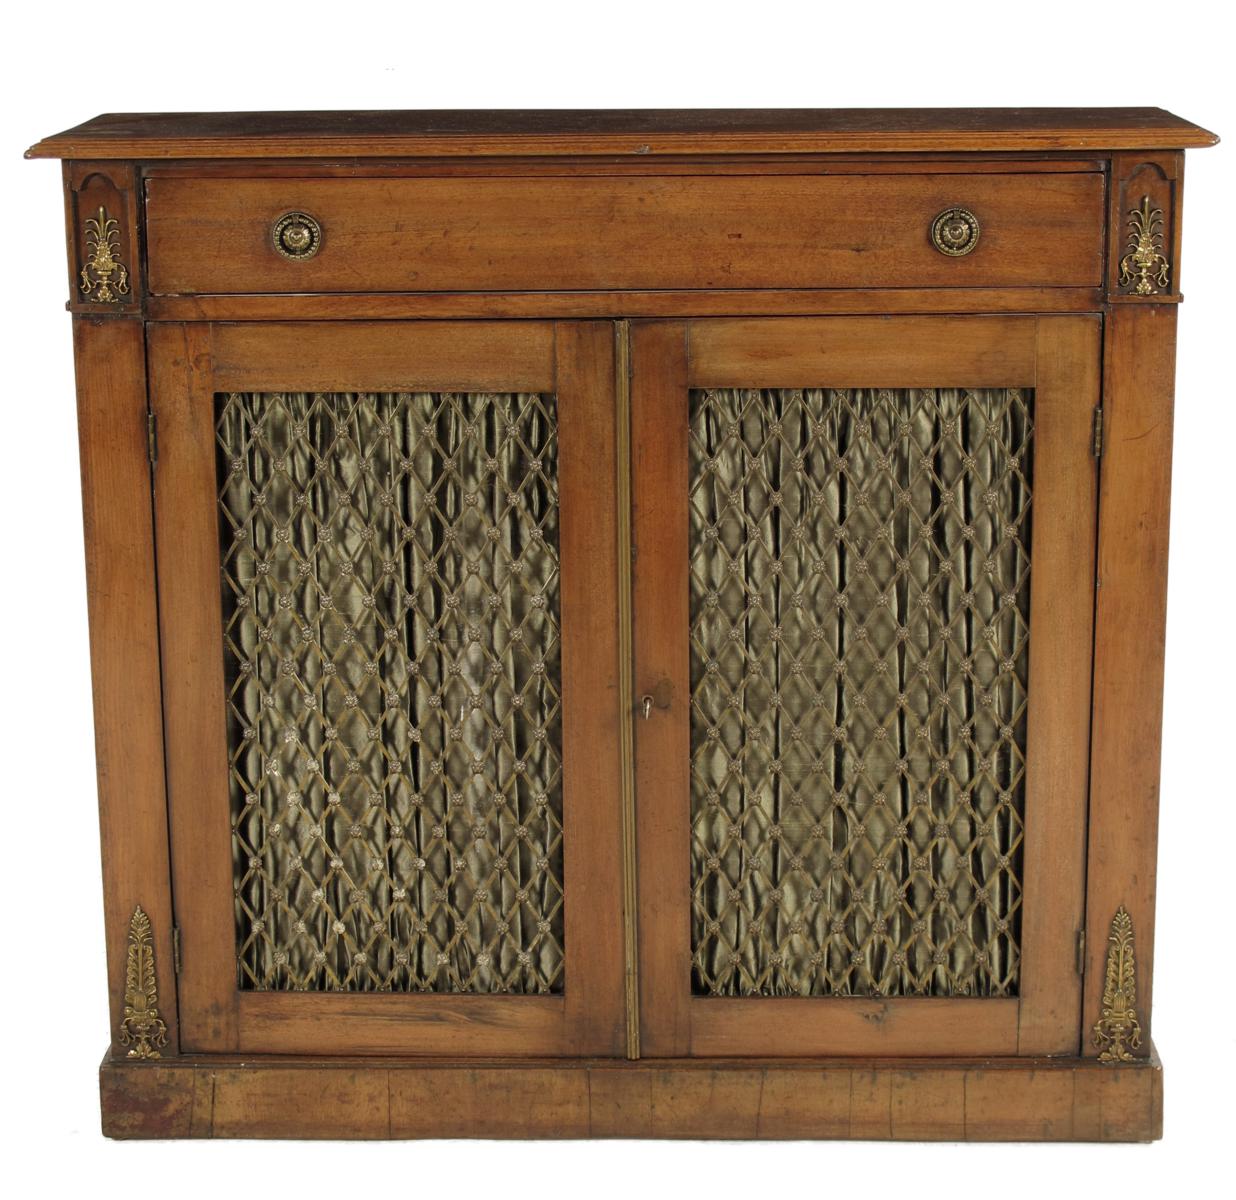 A mahogany side cabinet, in Regency style, with gilt metal mounts, with a pair of brass grille